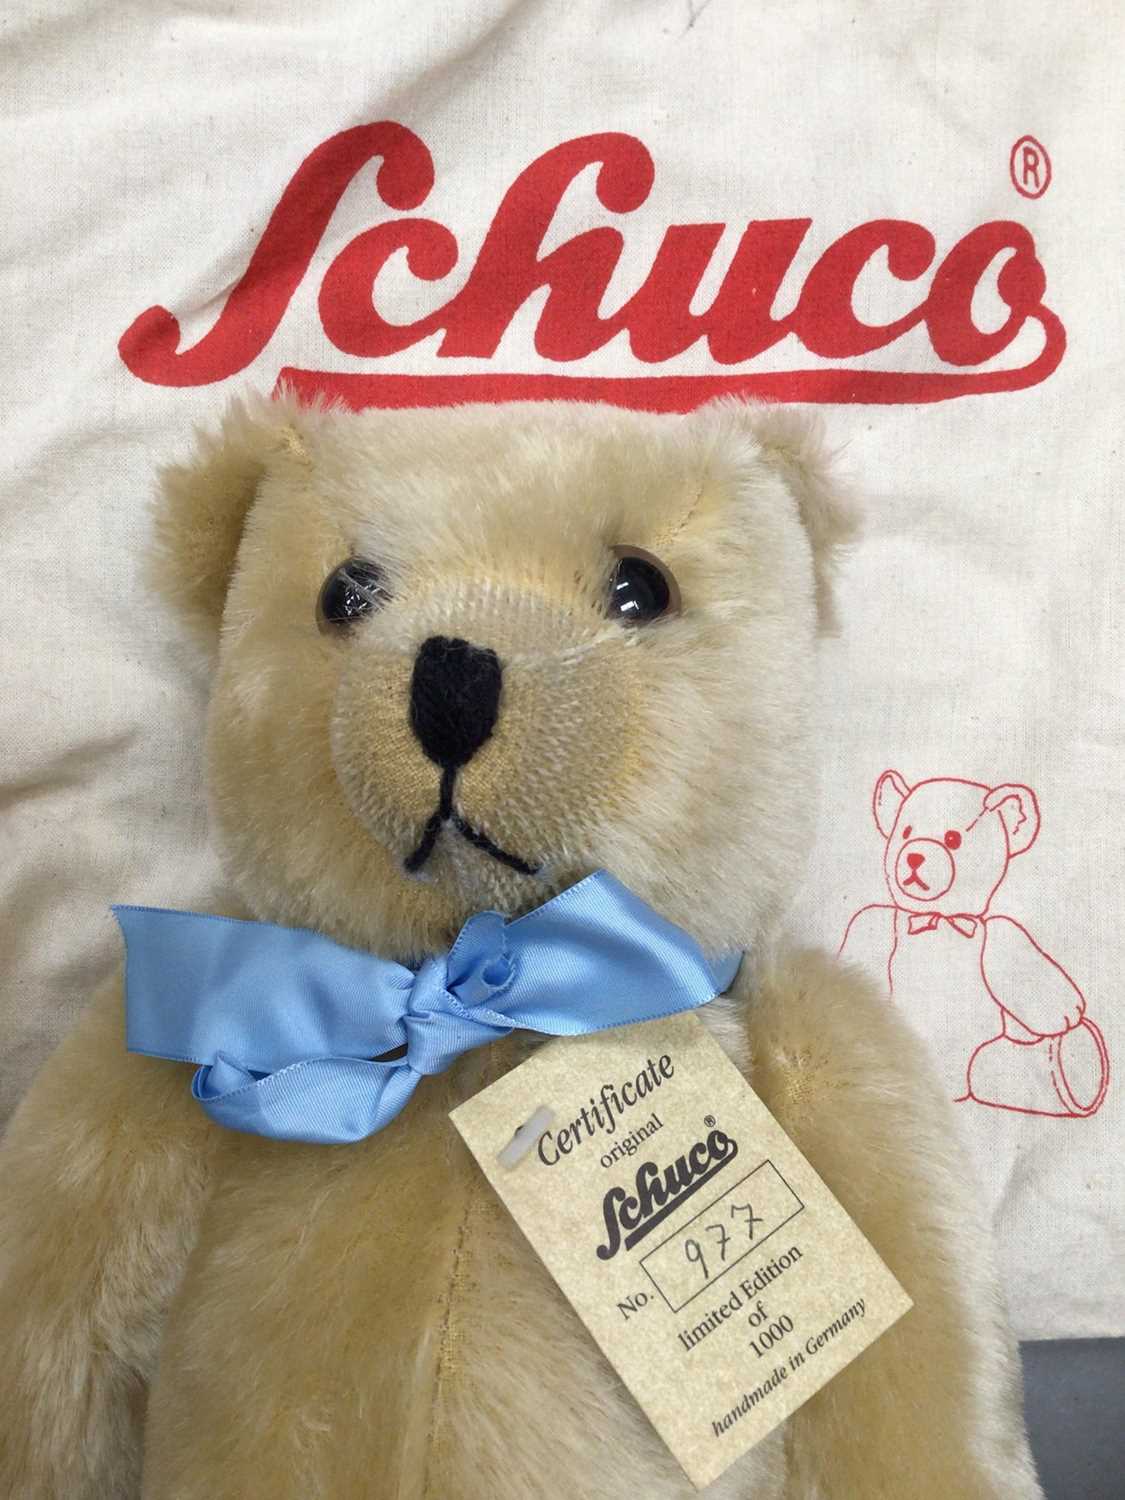 Schuco limited edition bear with growler, no. 977 of 1000, in cavas bag, together with a 1960s Germa - Image 2 of 3